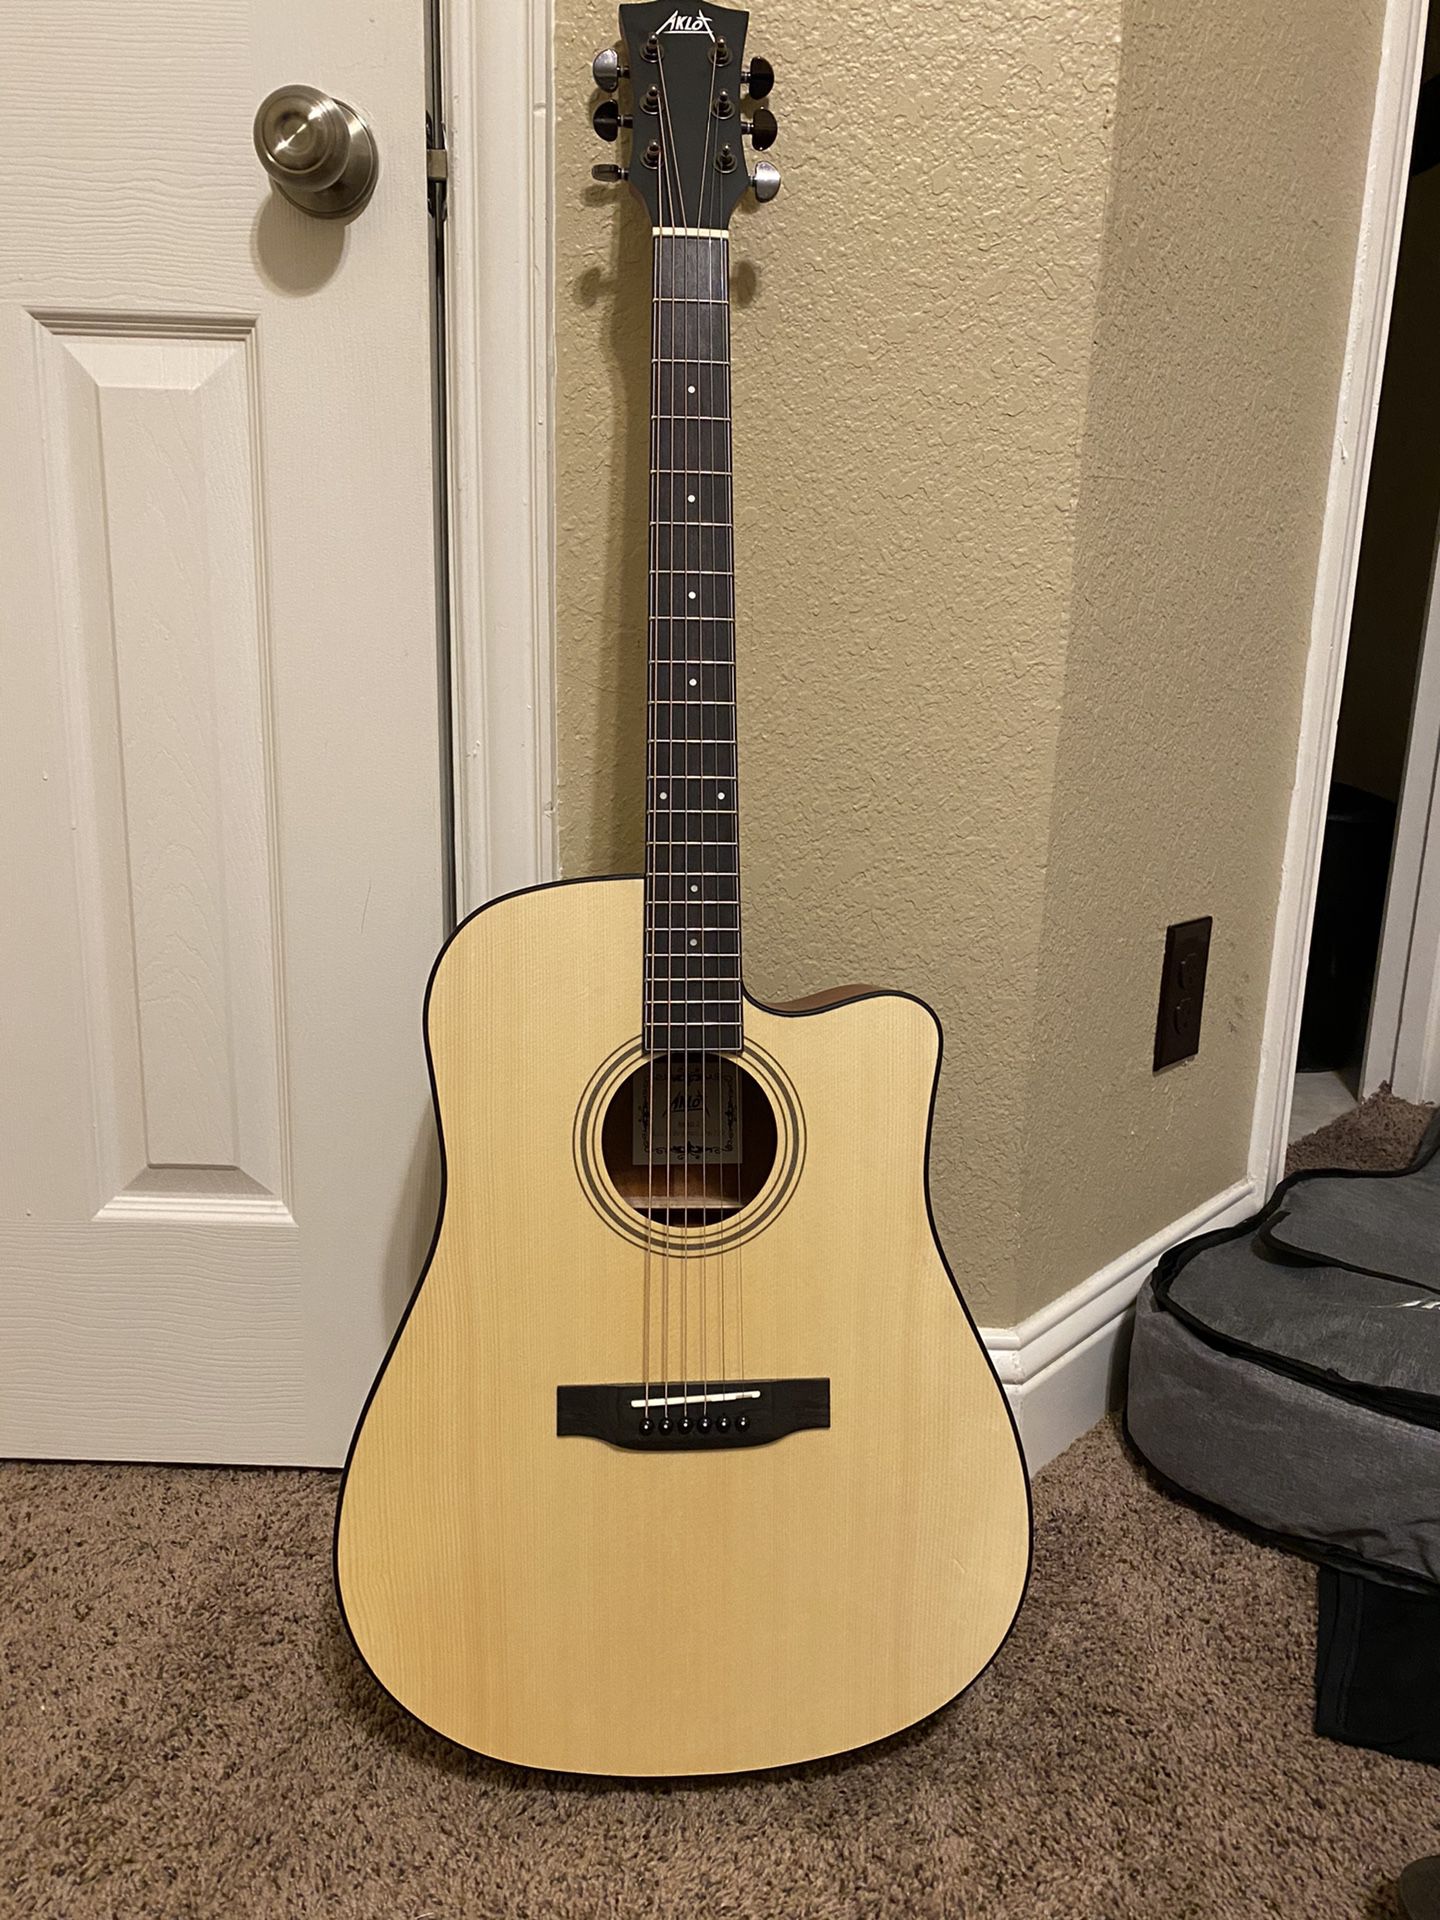 Aklot Guitar Brand New Comes With Case And Accessories